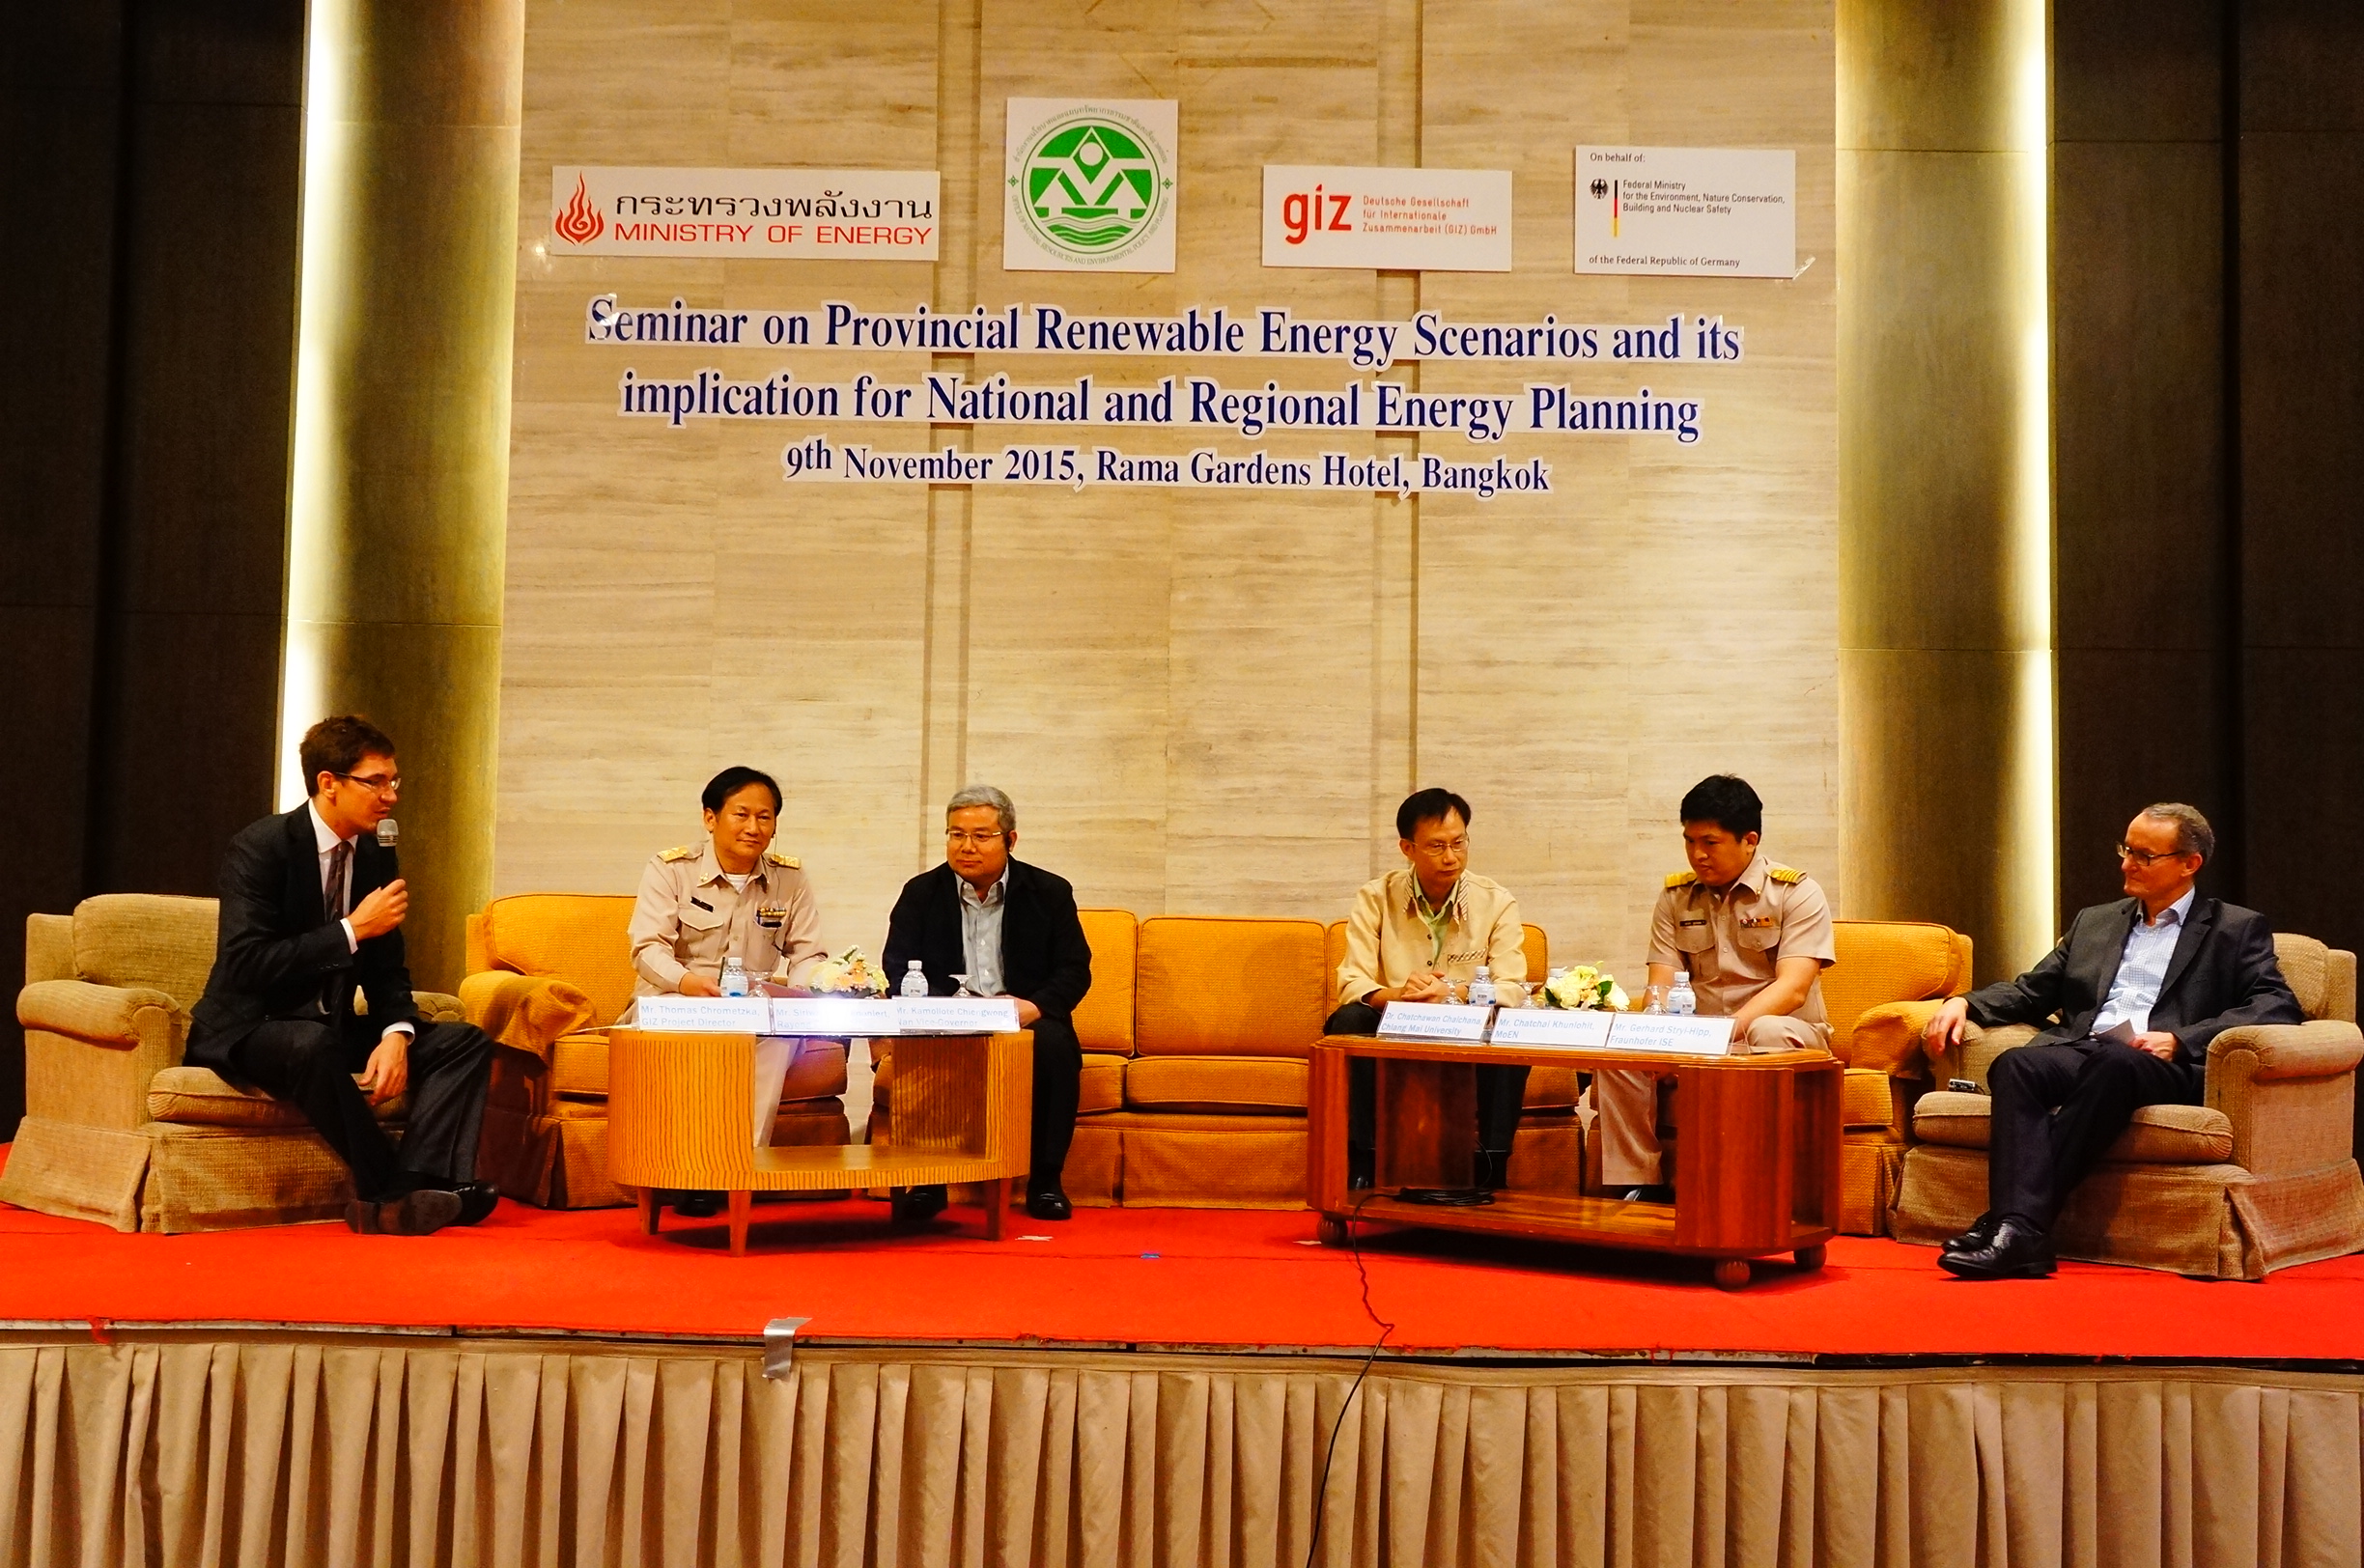 Seminar on Provincial Renewable Energy Scenarios and its implication for National and Regional Energy Planning